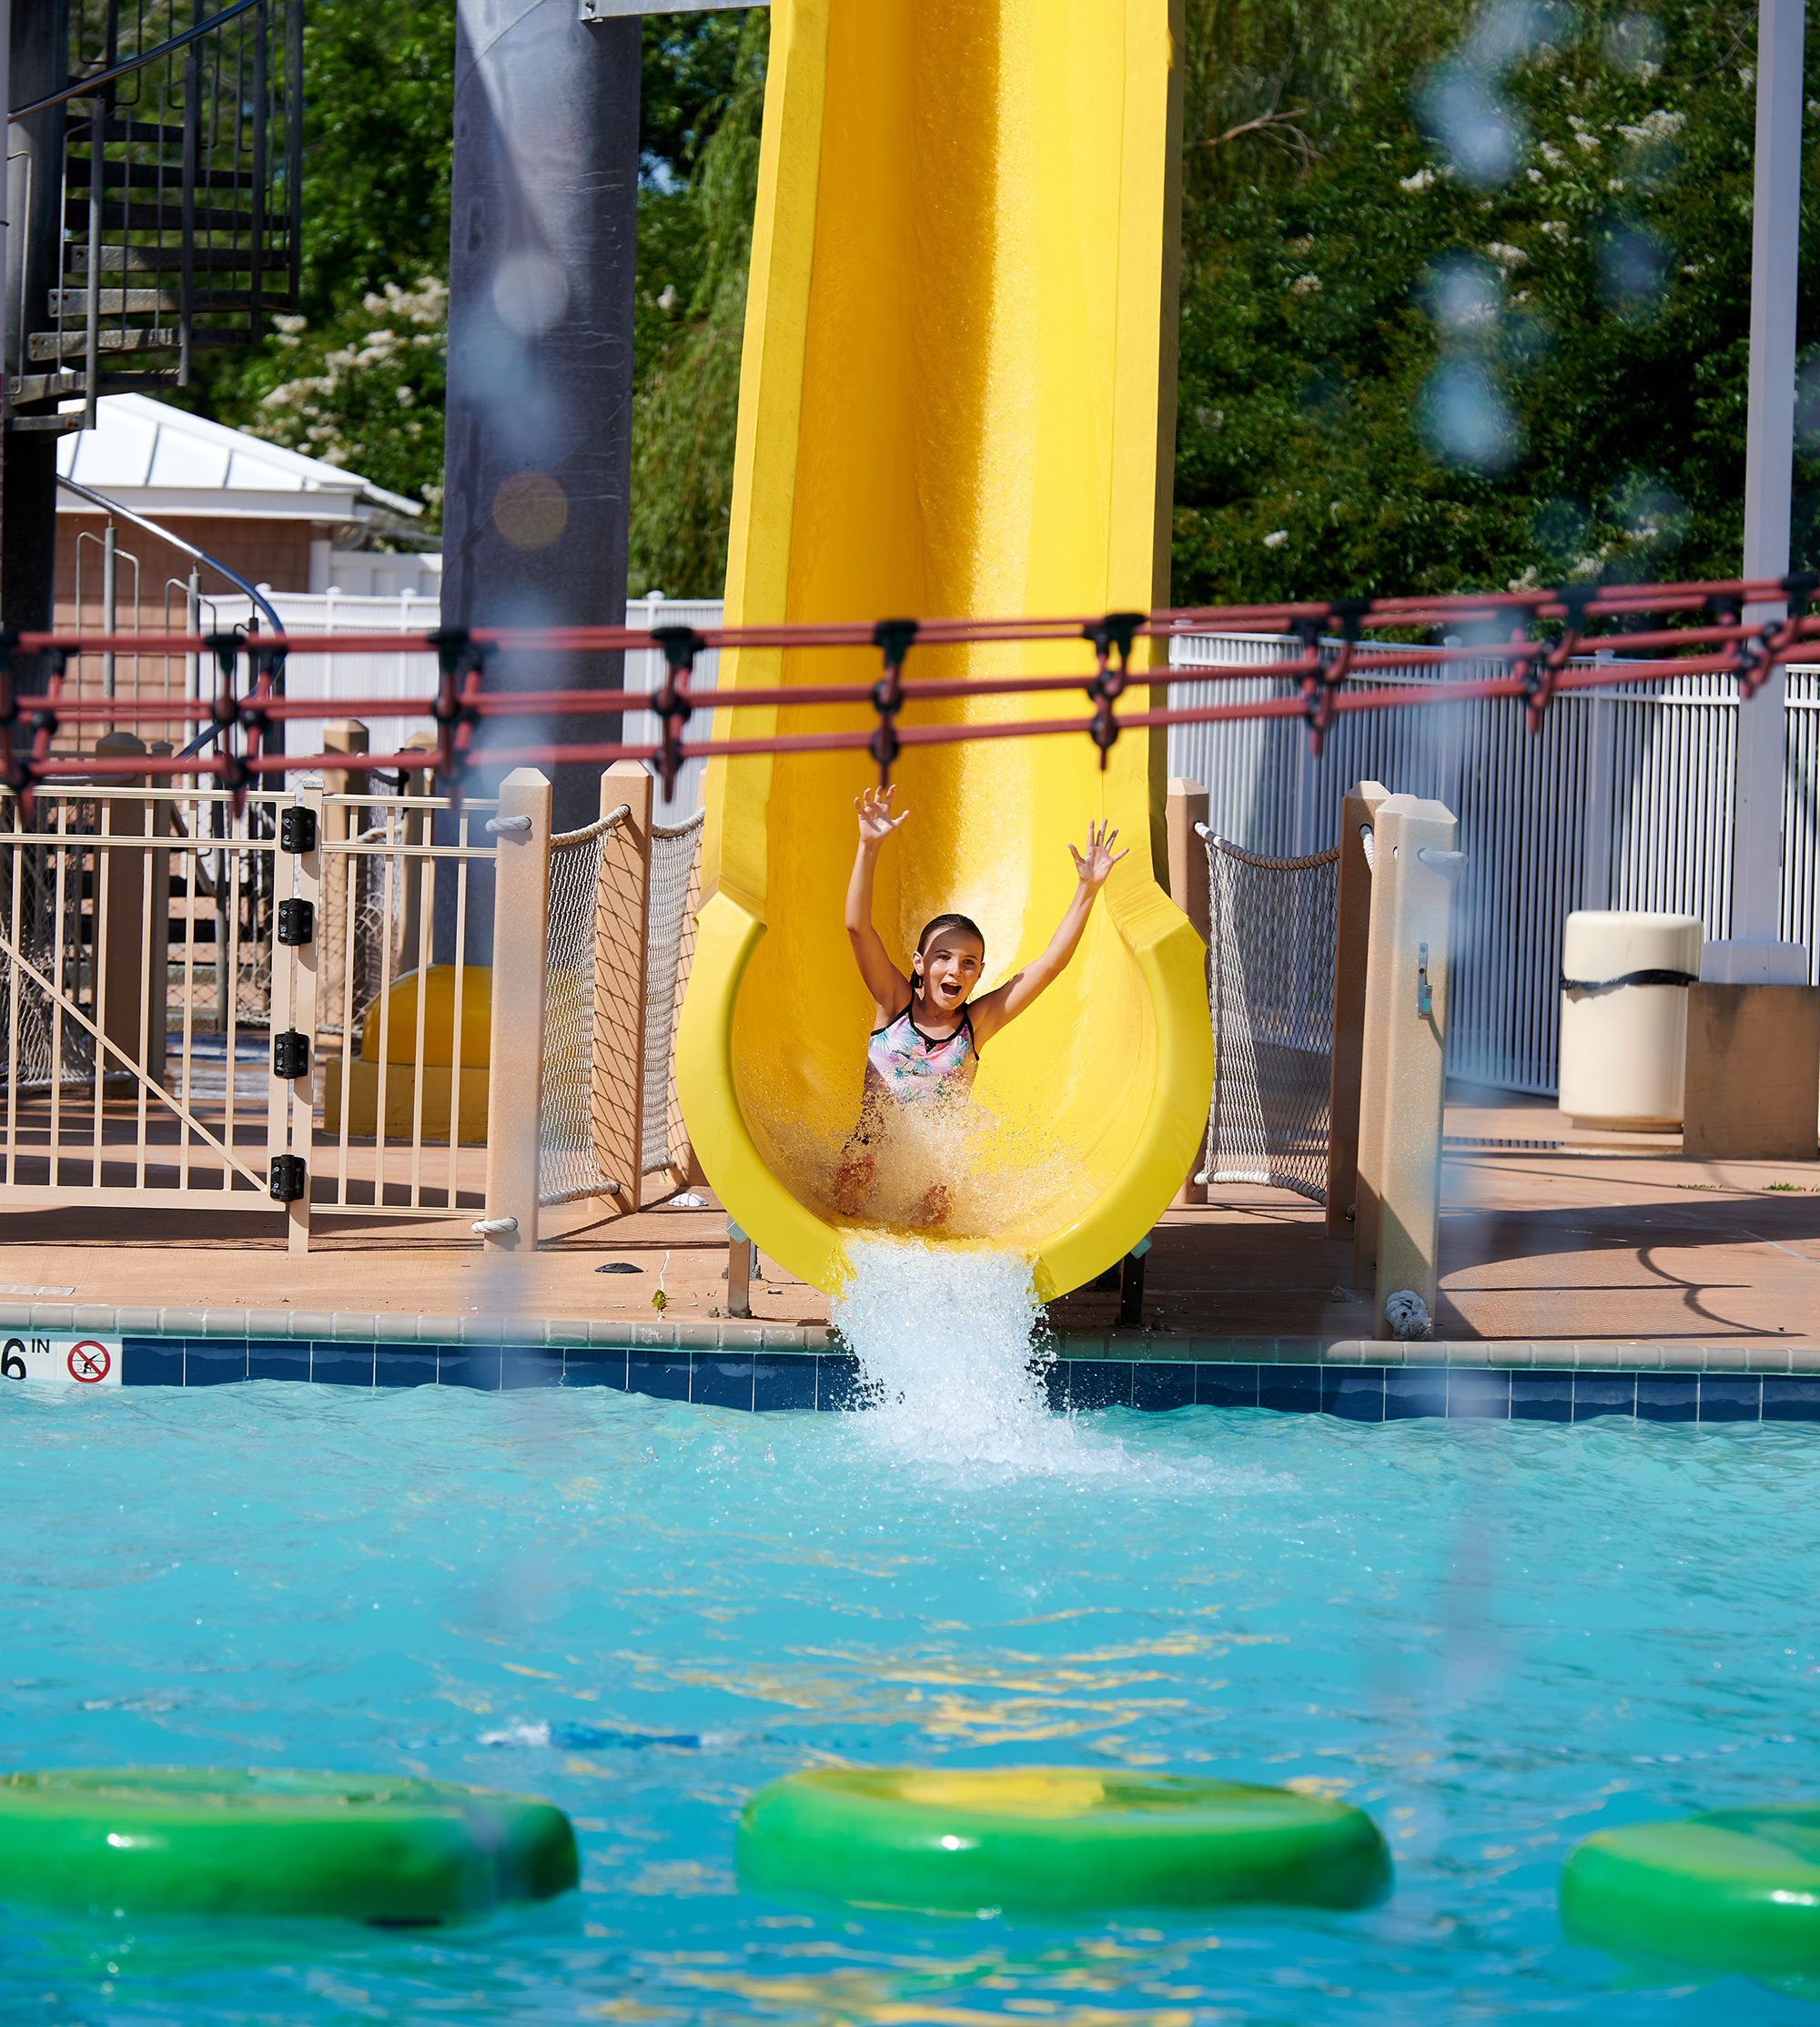 Girl races down a yellow waterslide.